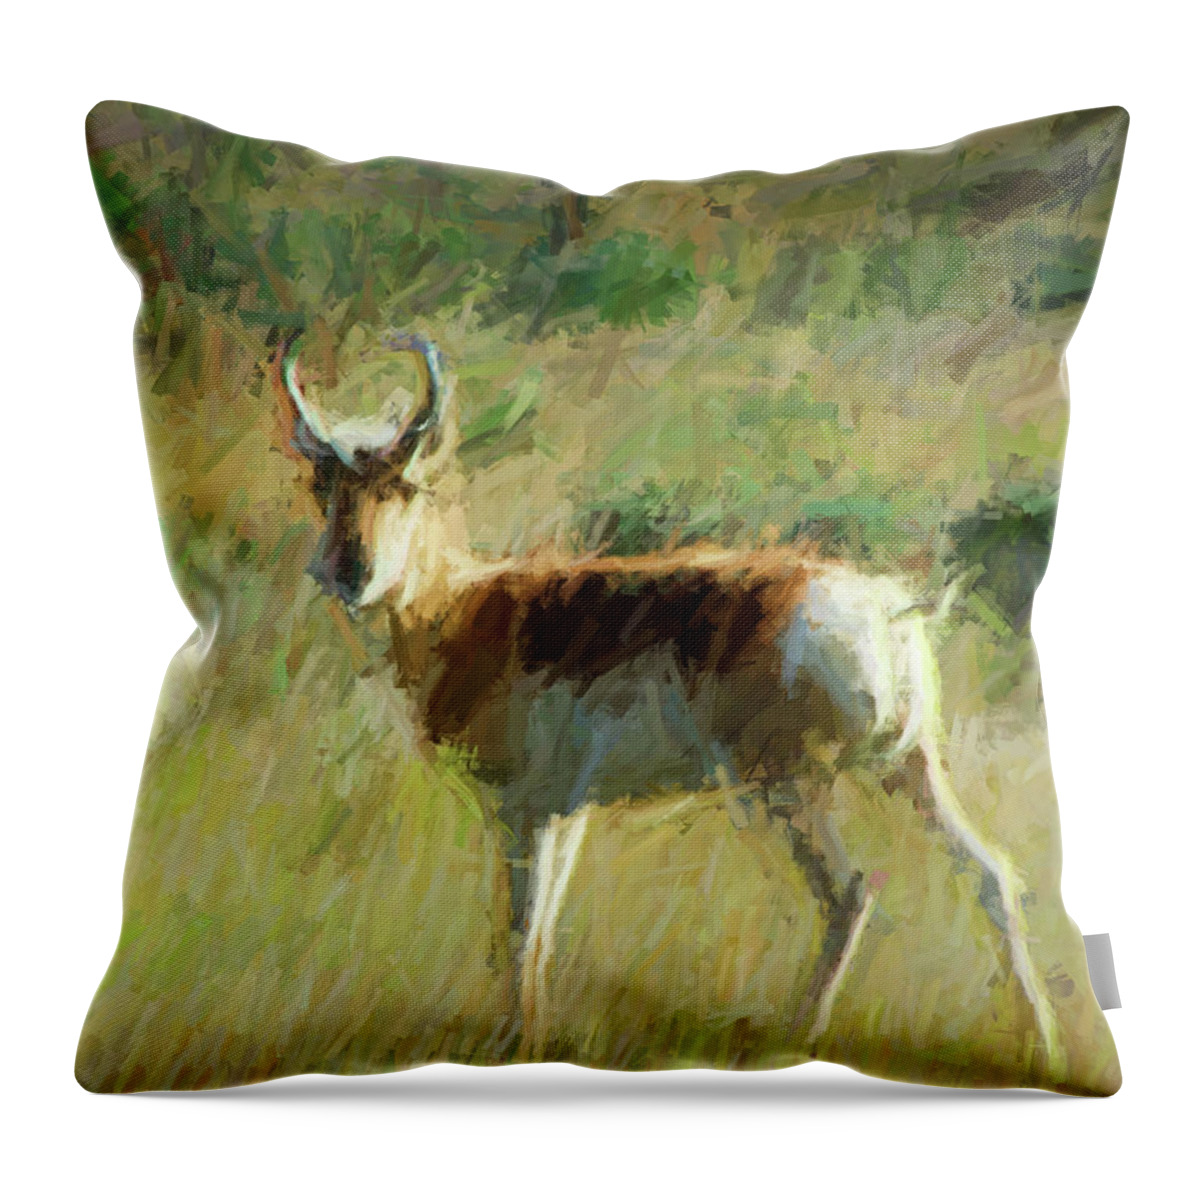 Digital Painting From A Photograph. Throw Pillow featuring the digital art Antelope Alone by Cathy Anderson